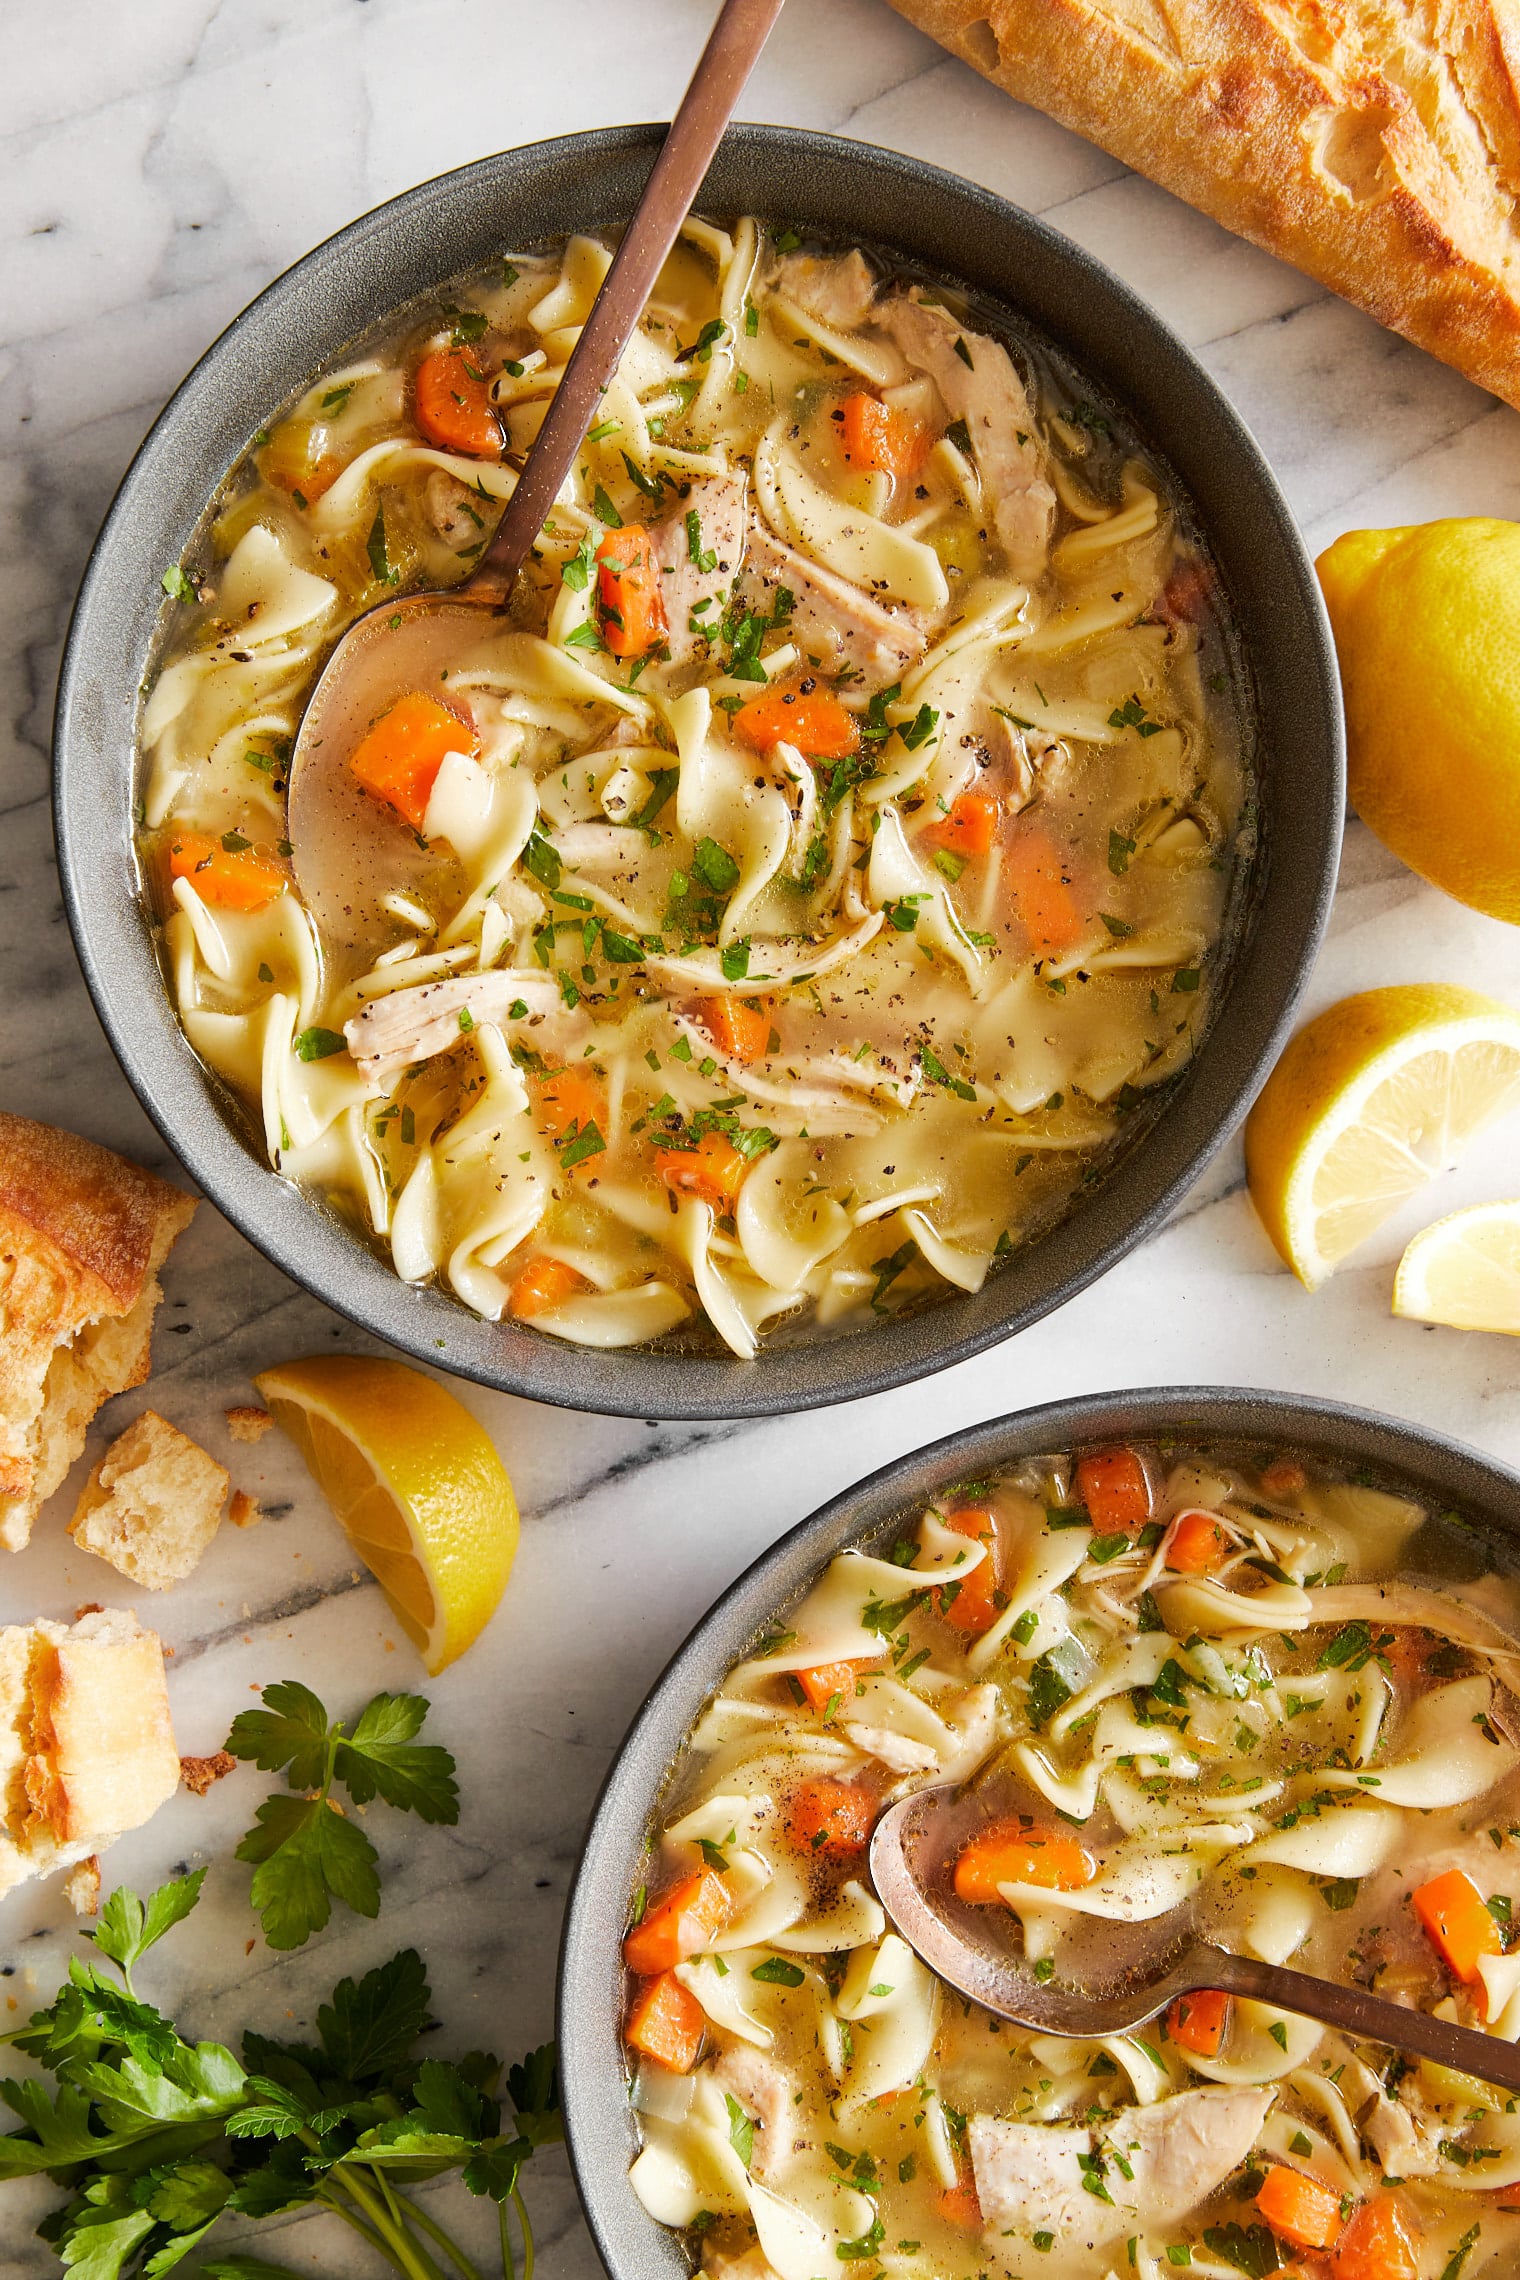 Homemade Chicken Noodle Soup - Jo Cooks